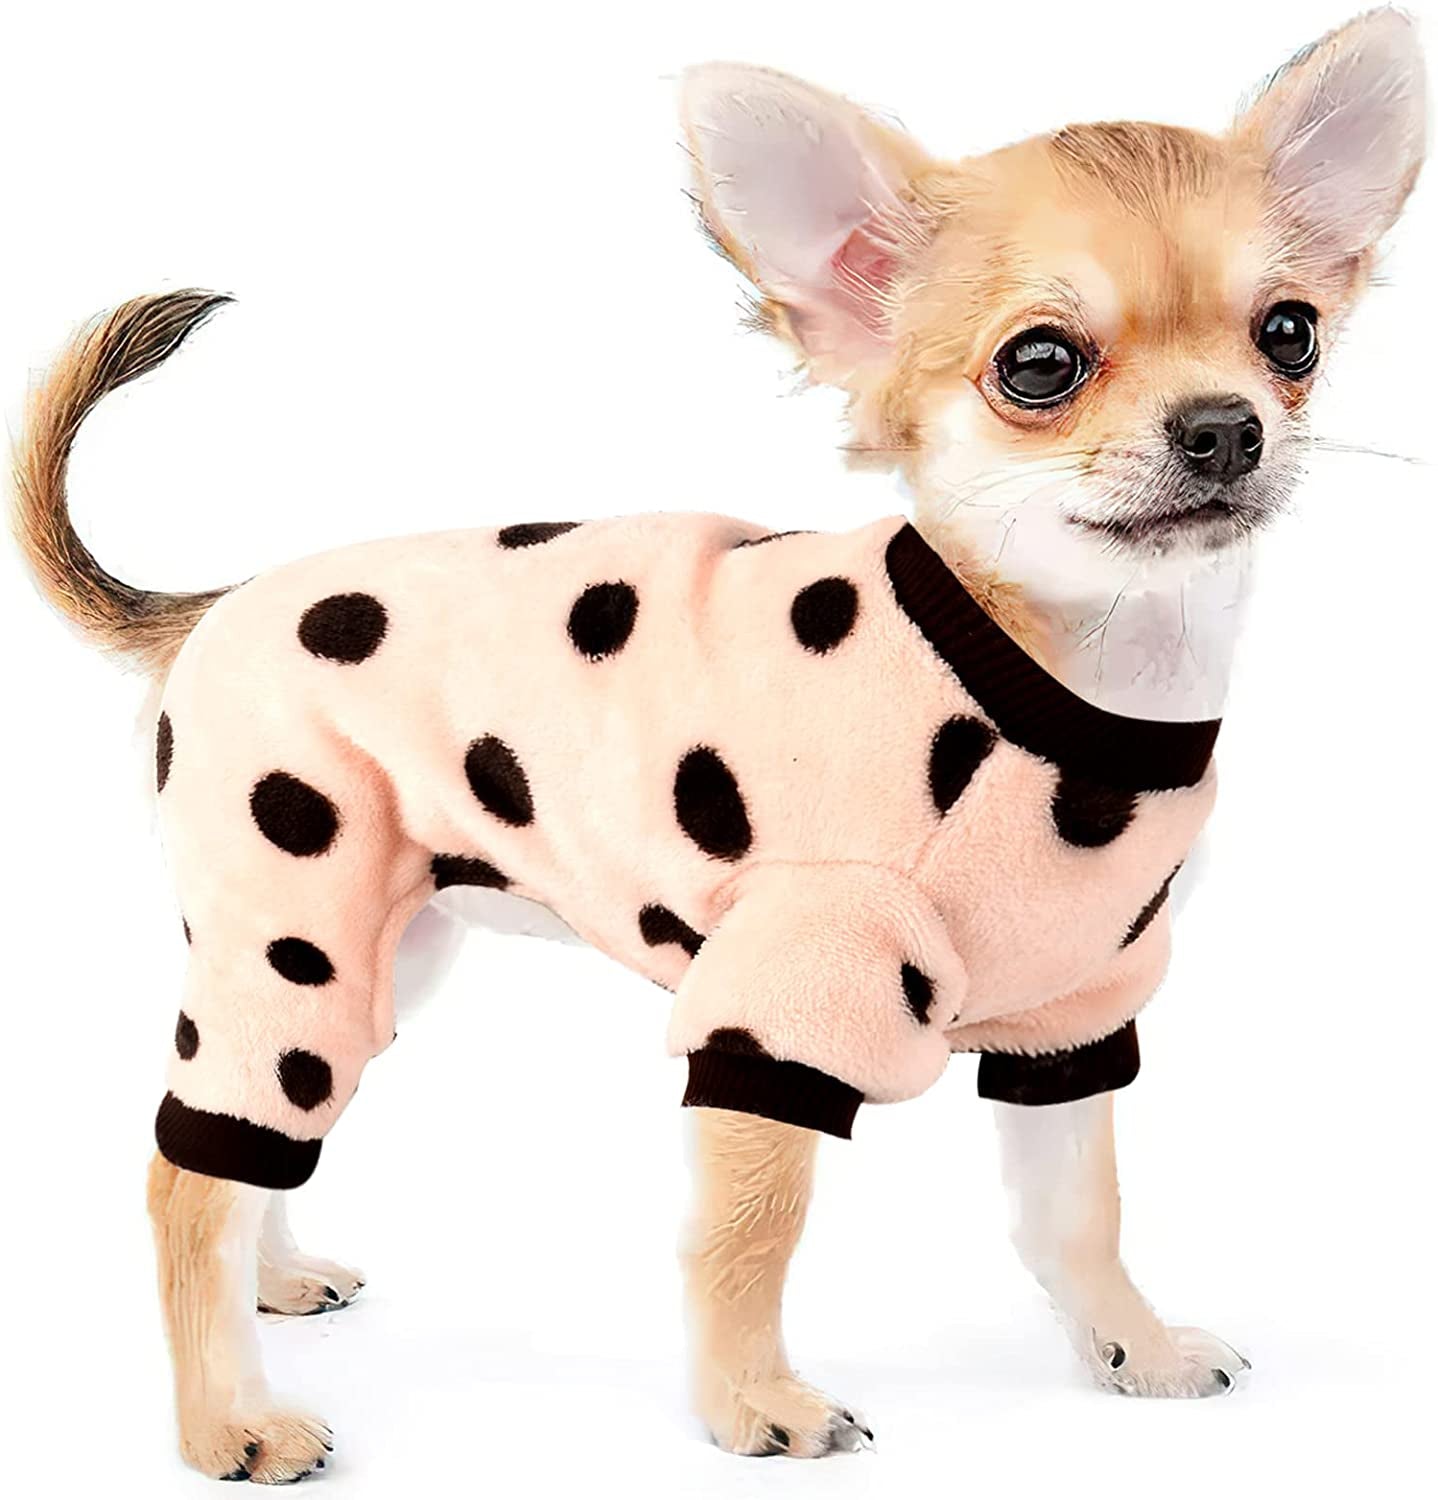  Dog Pajamas for Small Dogs Girl Boy Puppy Pjs Jammies 4 Leg  Dog Clothes for Chihuahua Yorkie Summer Onesies Jumpsuit Clothing for Pet  Dogs Male Female (Small (Bust 12.21 in)